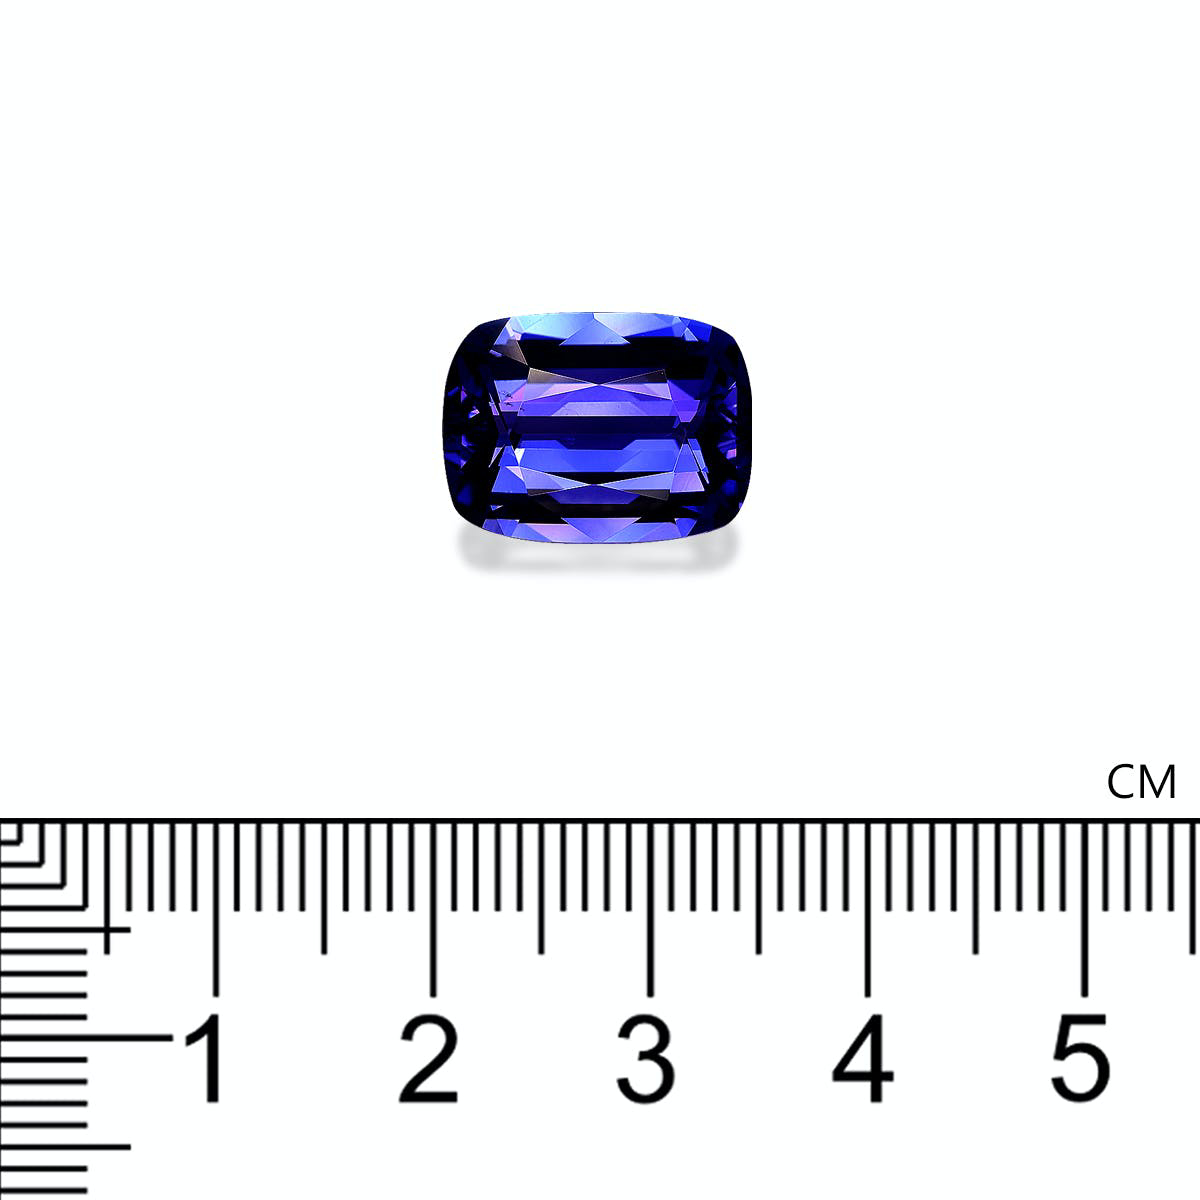 Picture of AAA+ Violet Blue Tanzanite 7.25ct (TN0671)